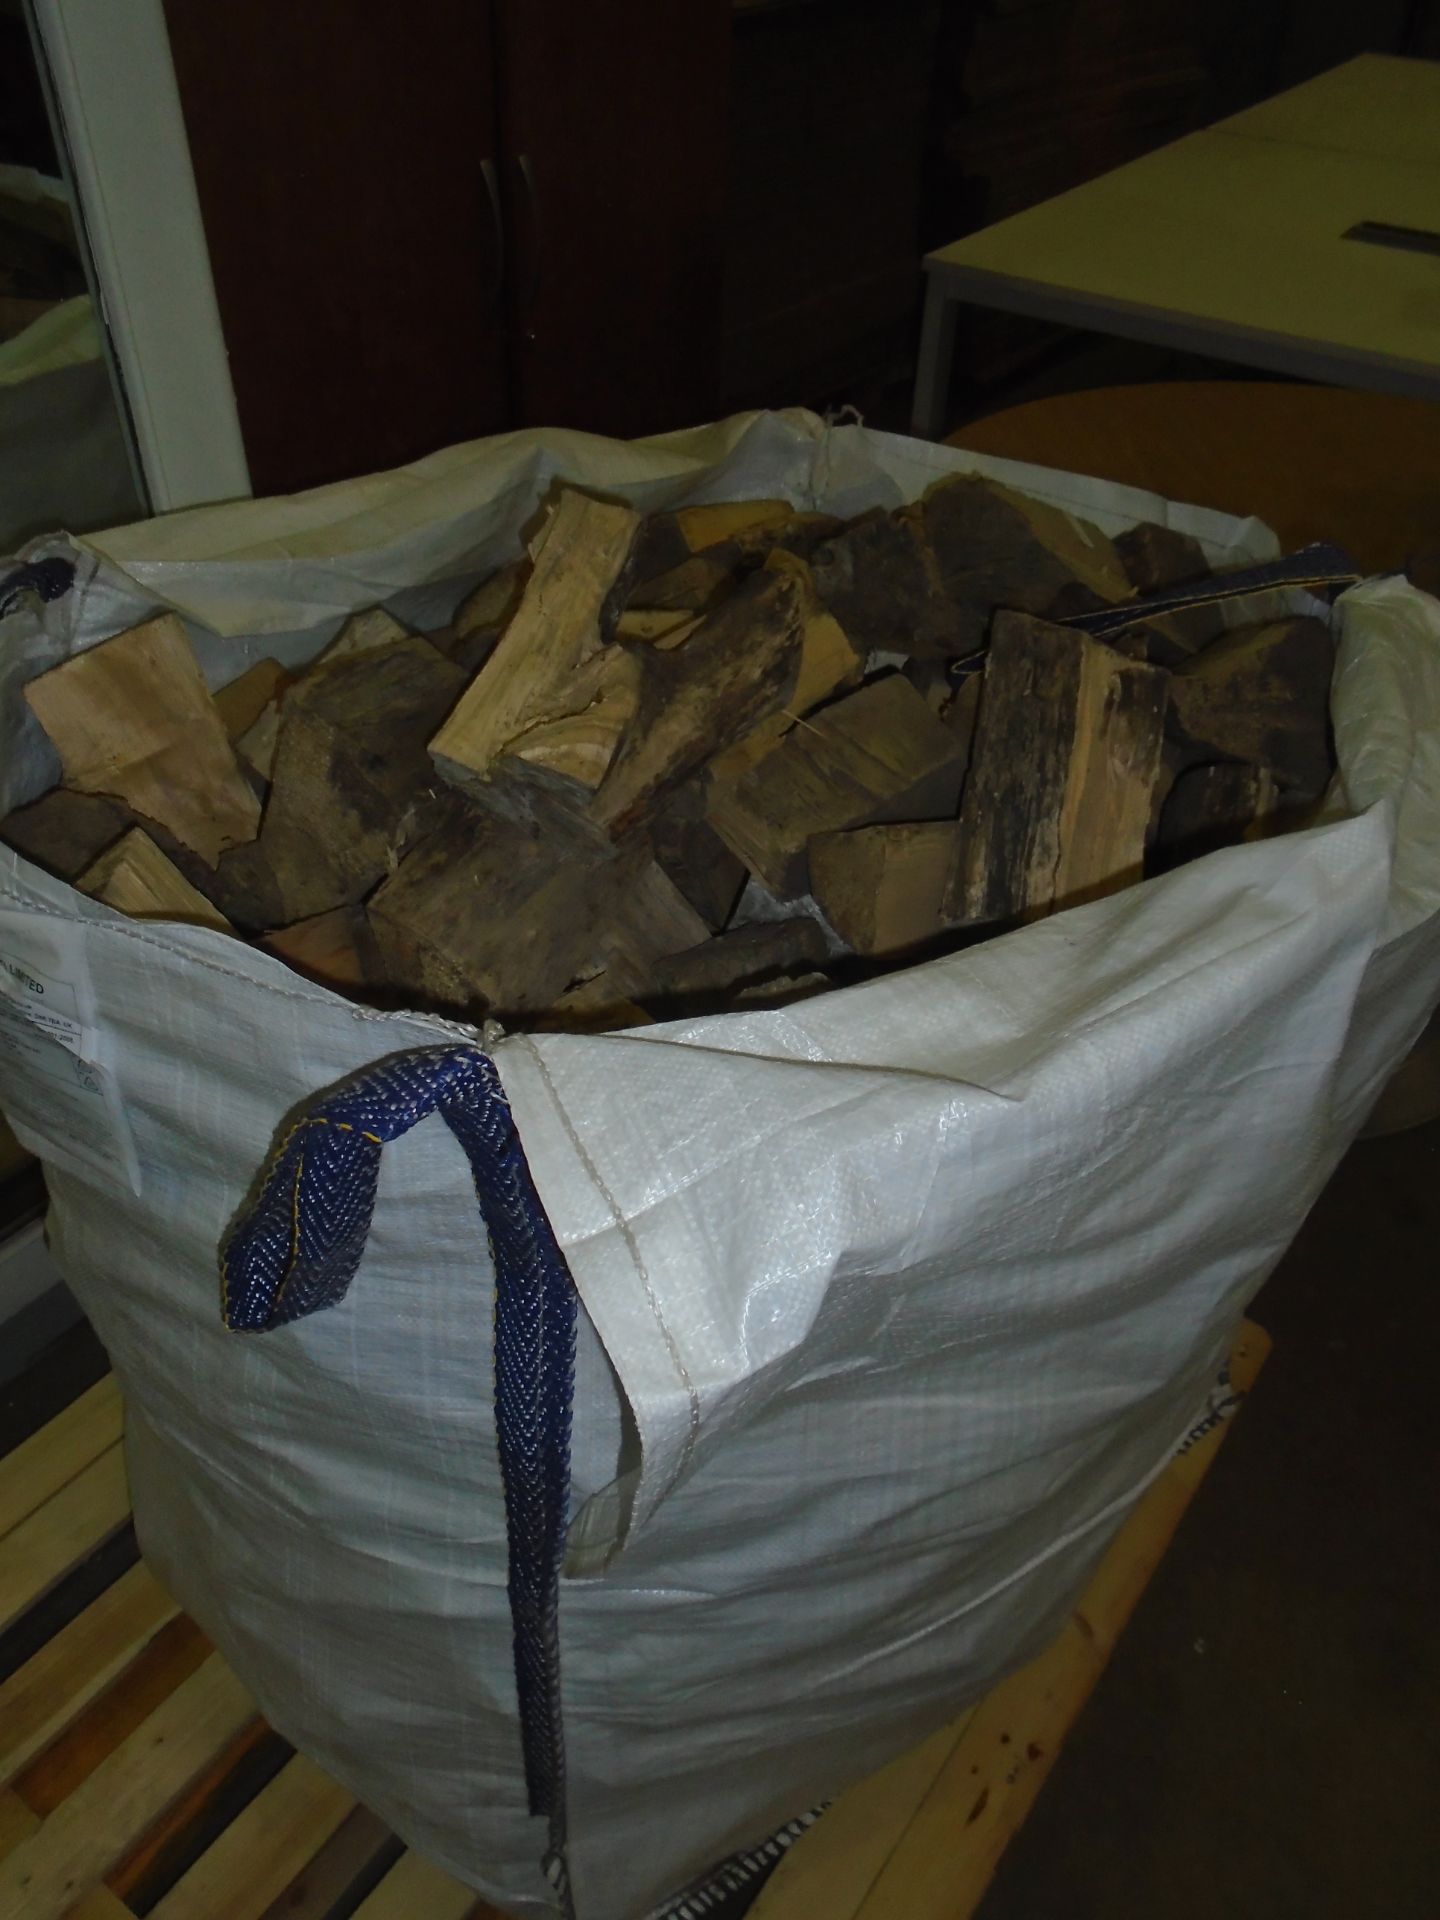 Contents to large sack - extra dry matured fire logs